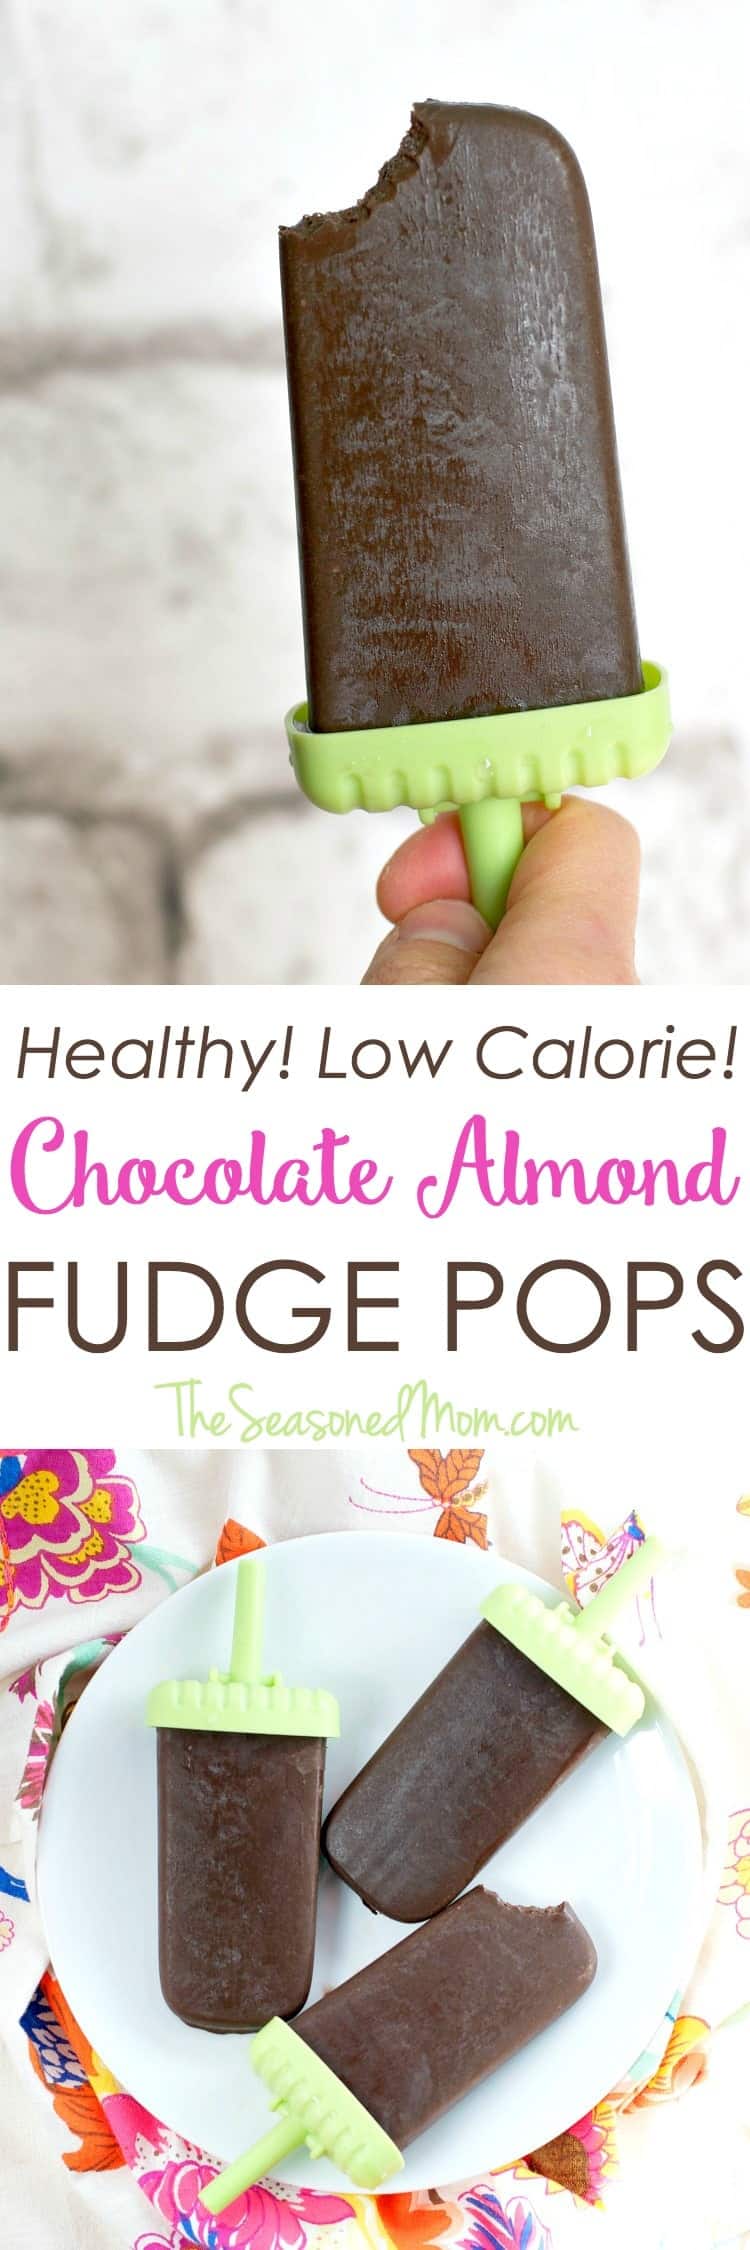 Rich, creamy, chocolatey...and good for you? That's right! These Healthy Chocolate Almond Fudge Pops are an easy, low-calorie, clean eating snack or dessert that will power you through the summer!